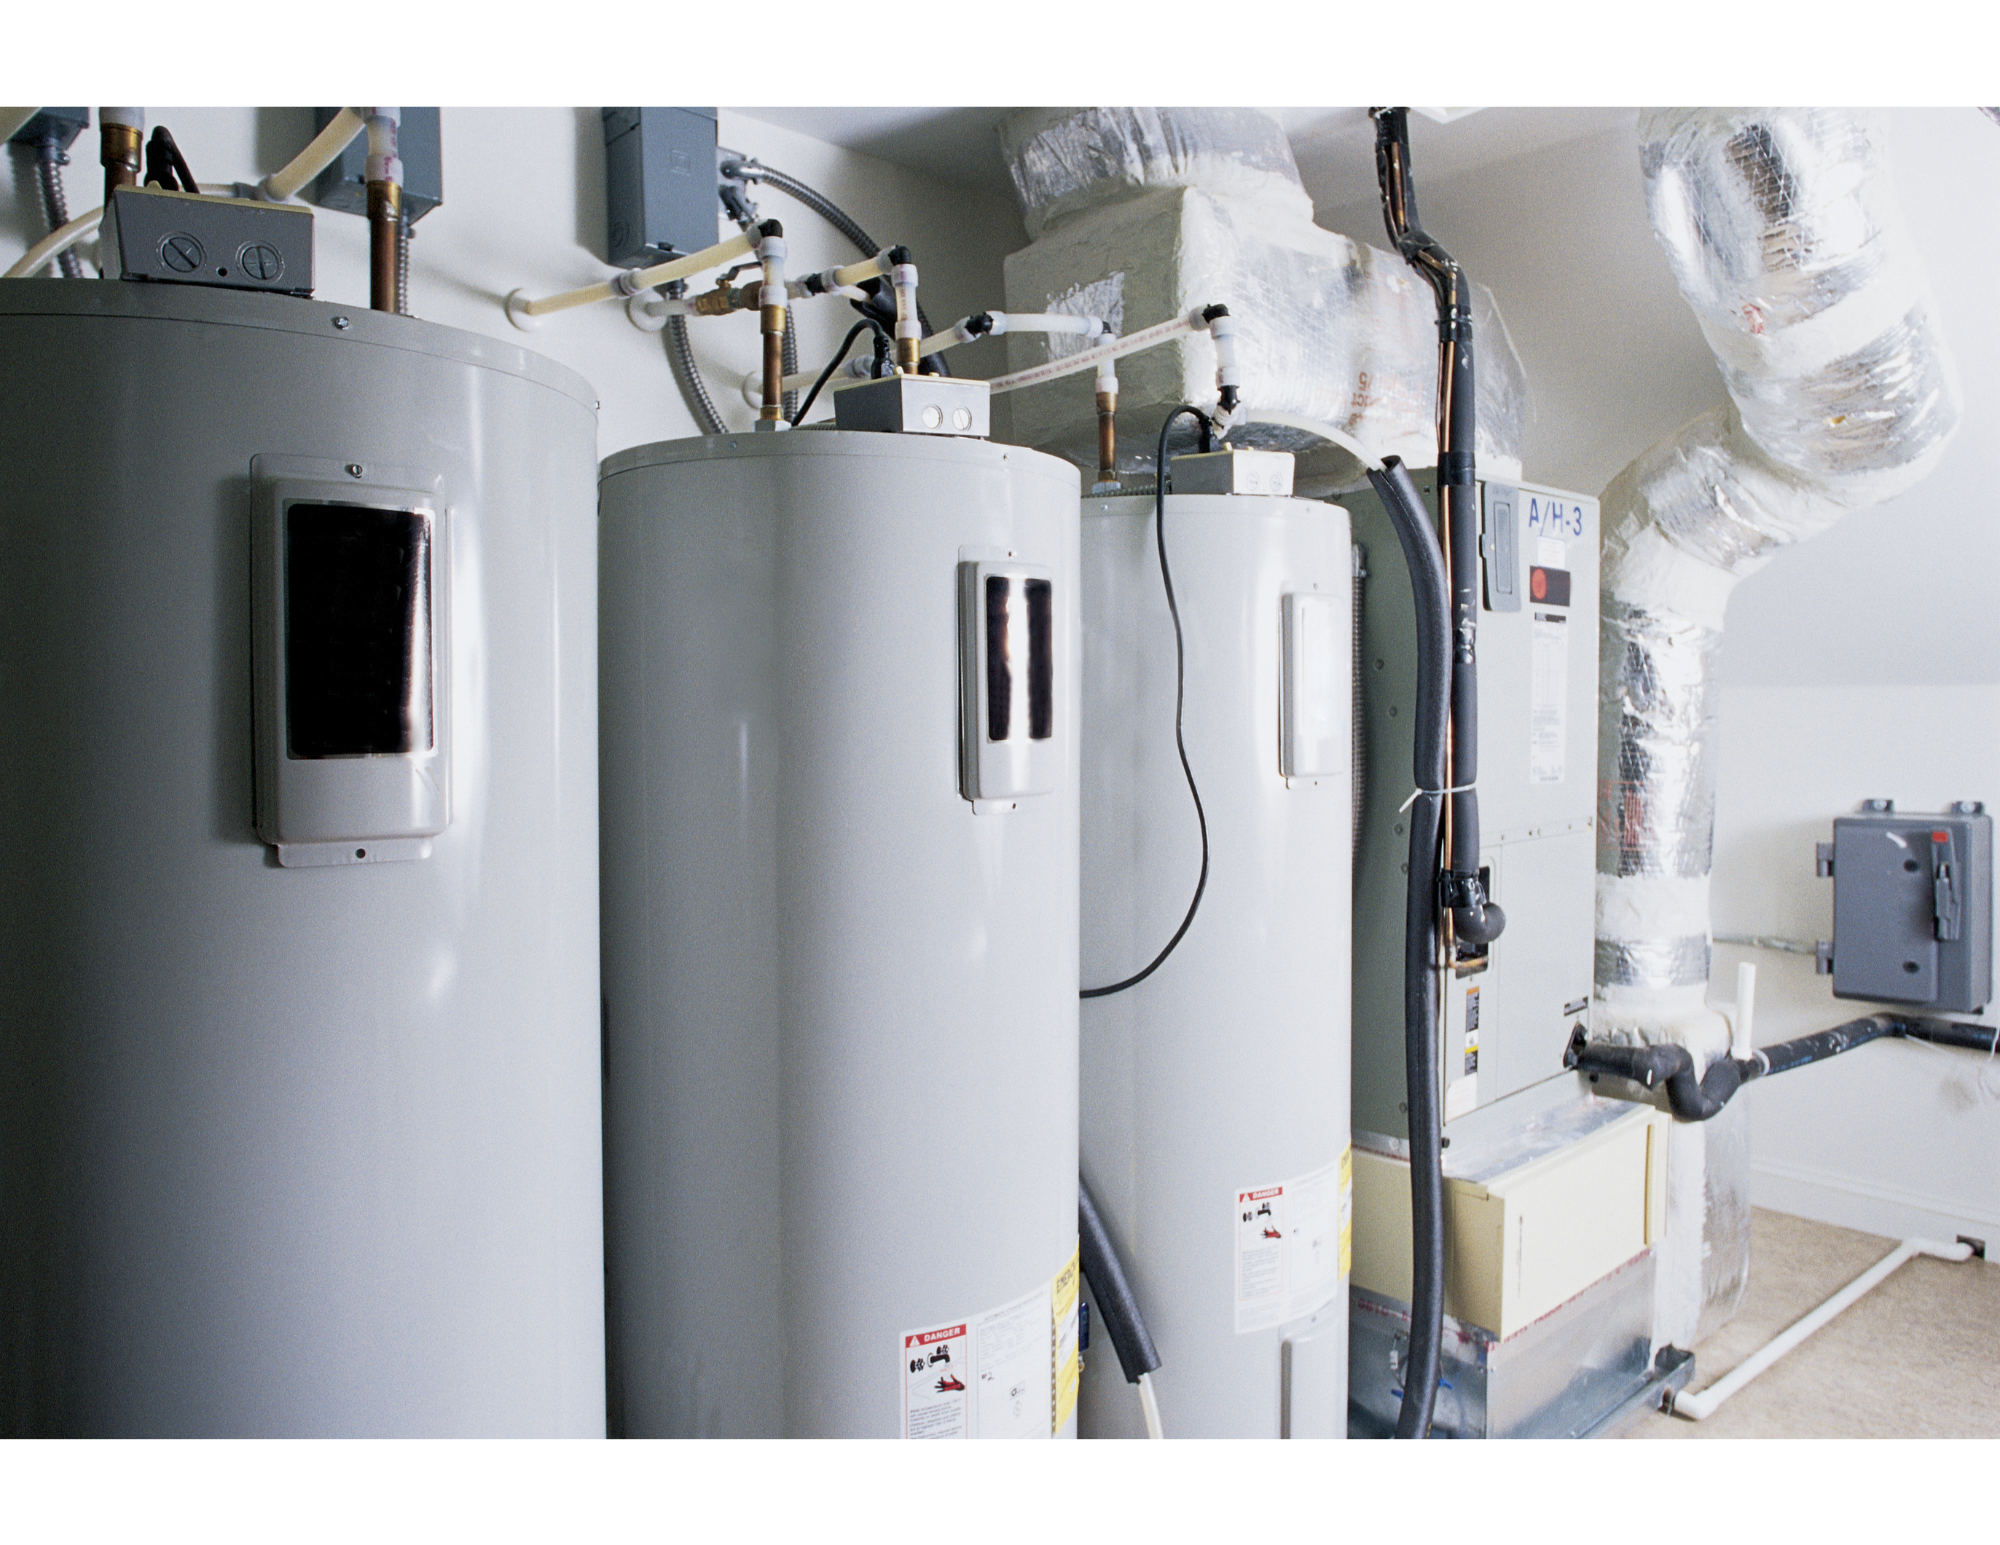 Boiler Vs Water Heater - What's The Difference?